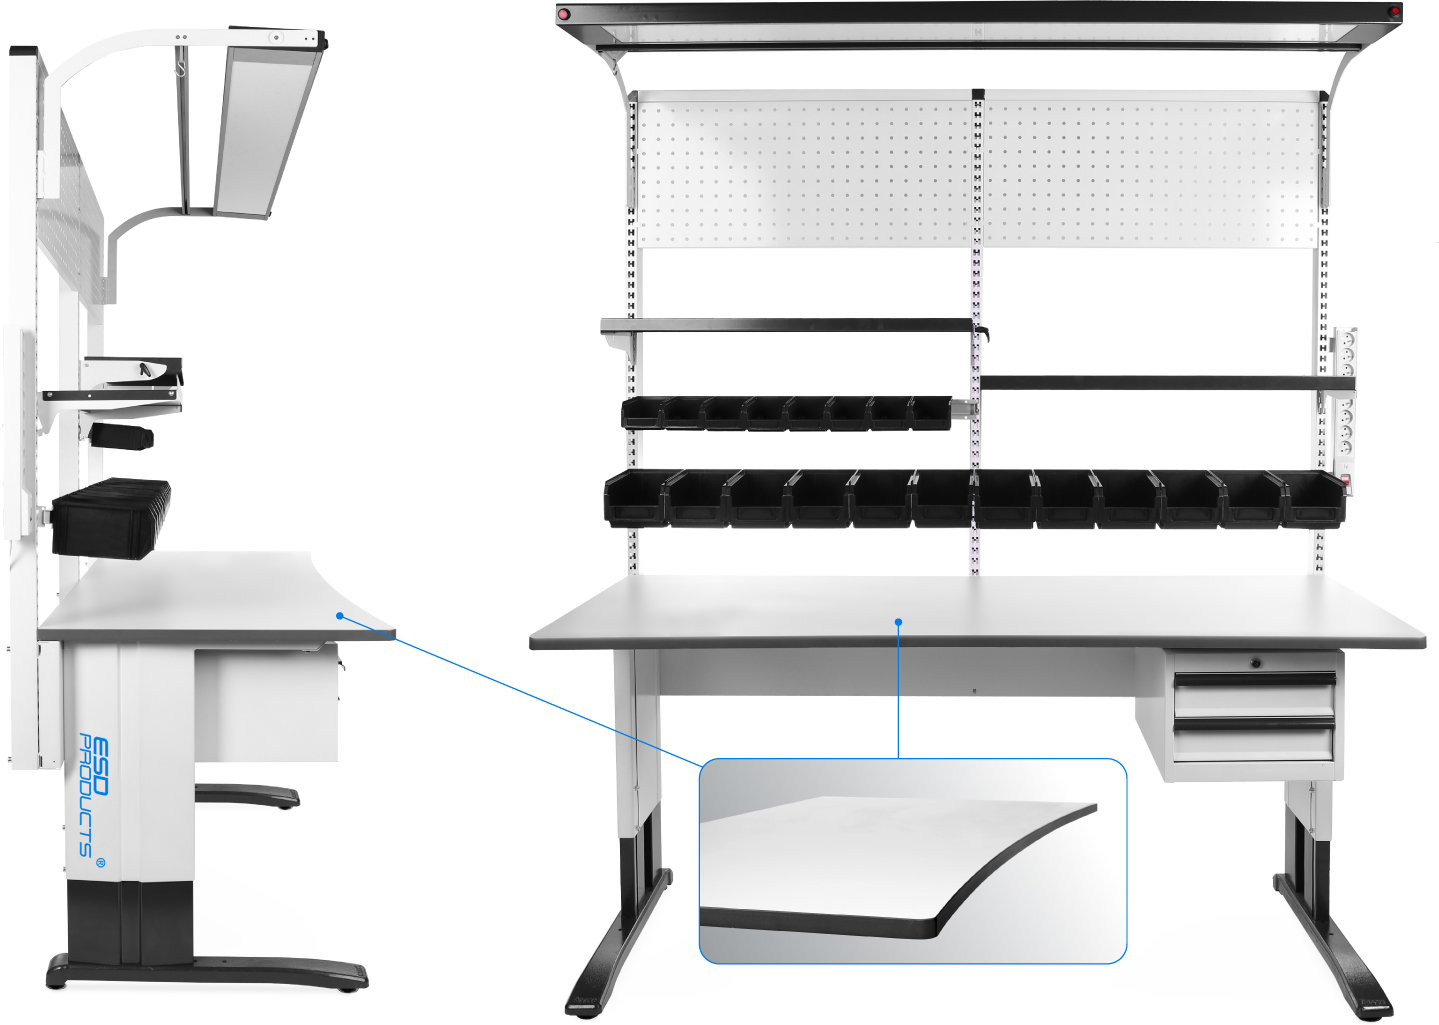 ESD-Workstation-Premium-Ergonomic-Table-Top-Reeco-Robert-1830-x-800-mm-ESD-Products-AES